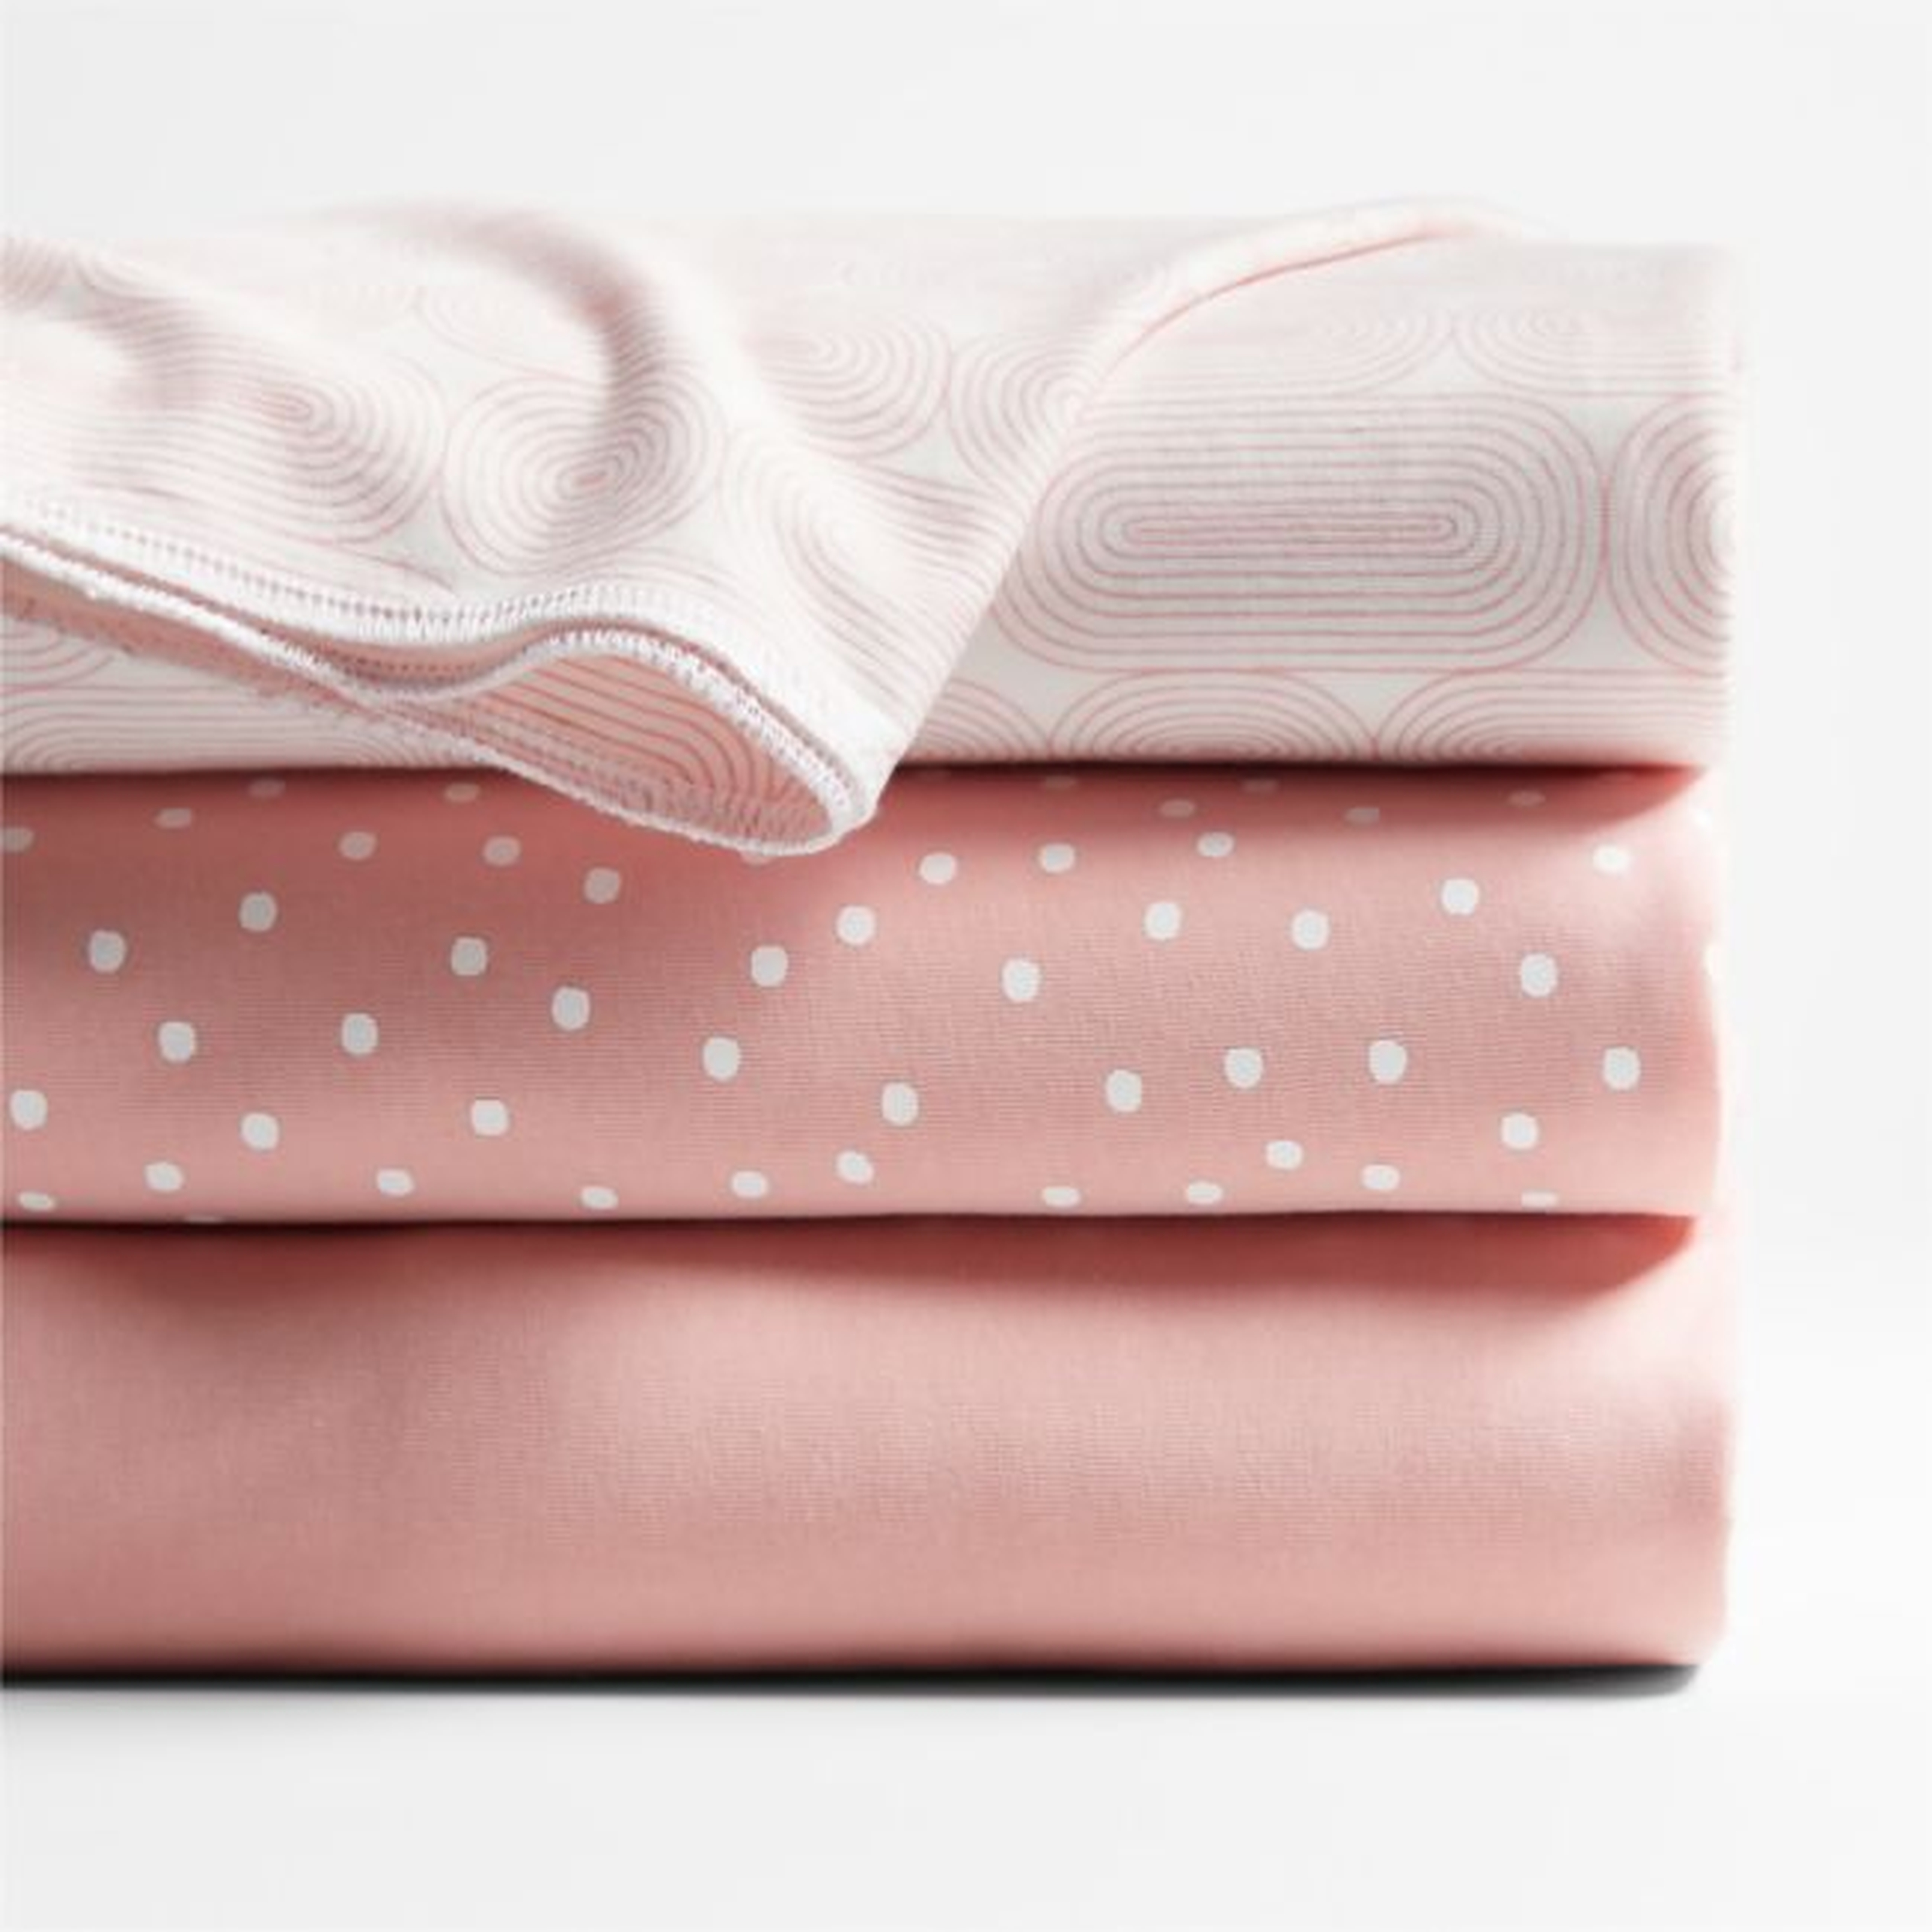 Zen Pink Organic Baby Swaddle Blankets, Set of 3 - Crate and Barrel